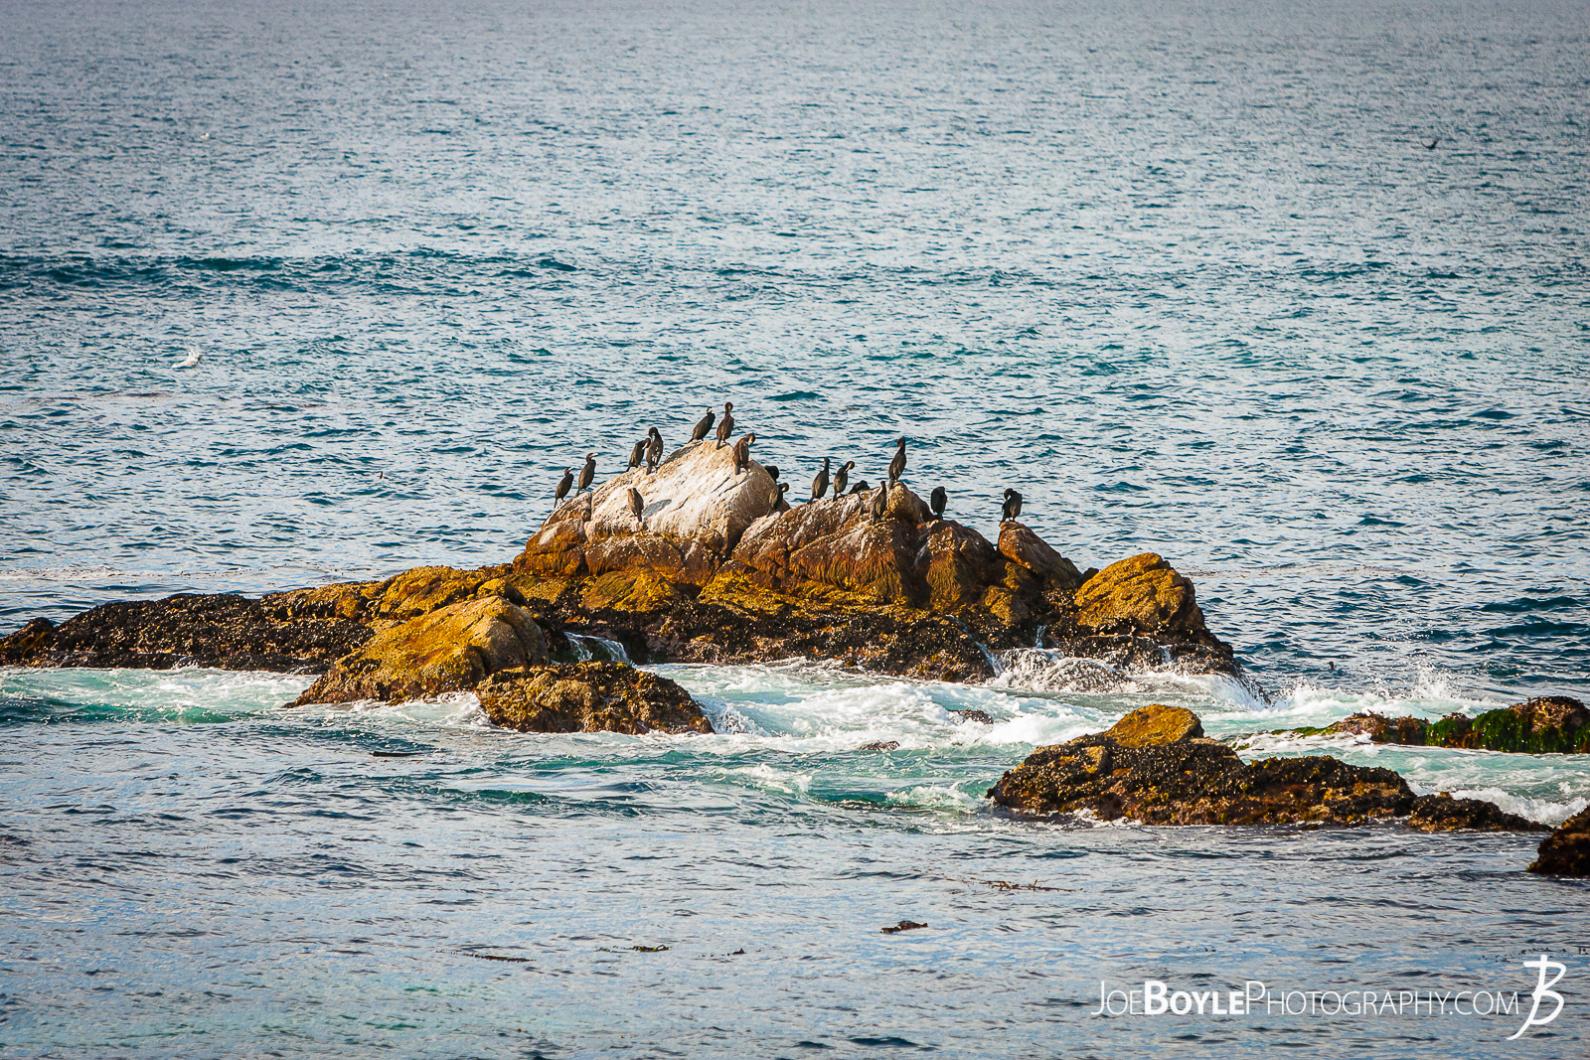 On our way along the 17 Mile Drive to Carmel by the Sea there was quite a bit of wildlife! Their were a lot of birds sitting on rocks like this one pictured here. I believe they are called Cormorants.